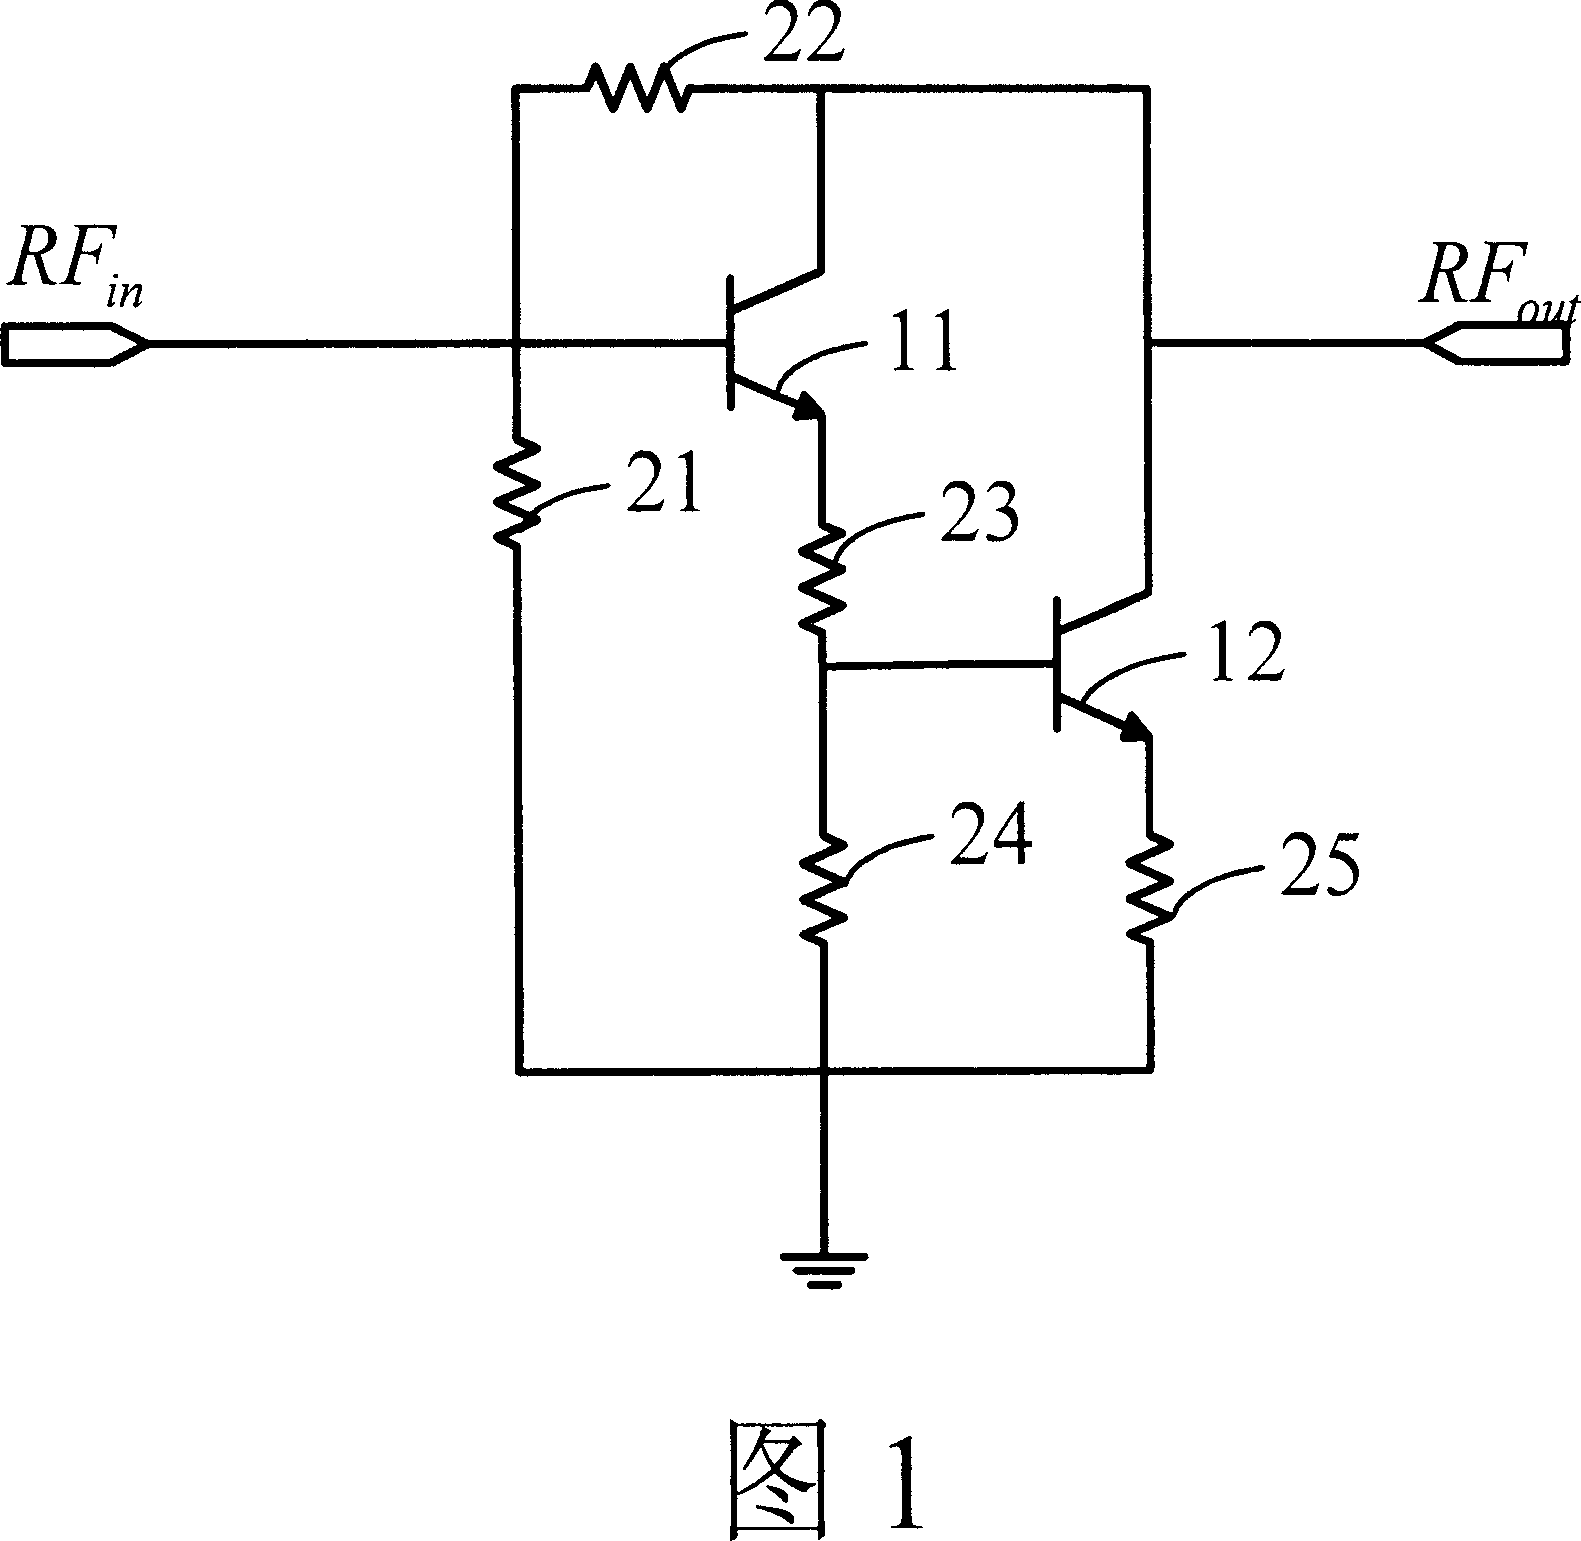 High gain wideband amplifier circuit with temperature compensation